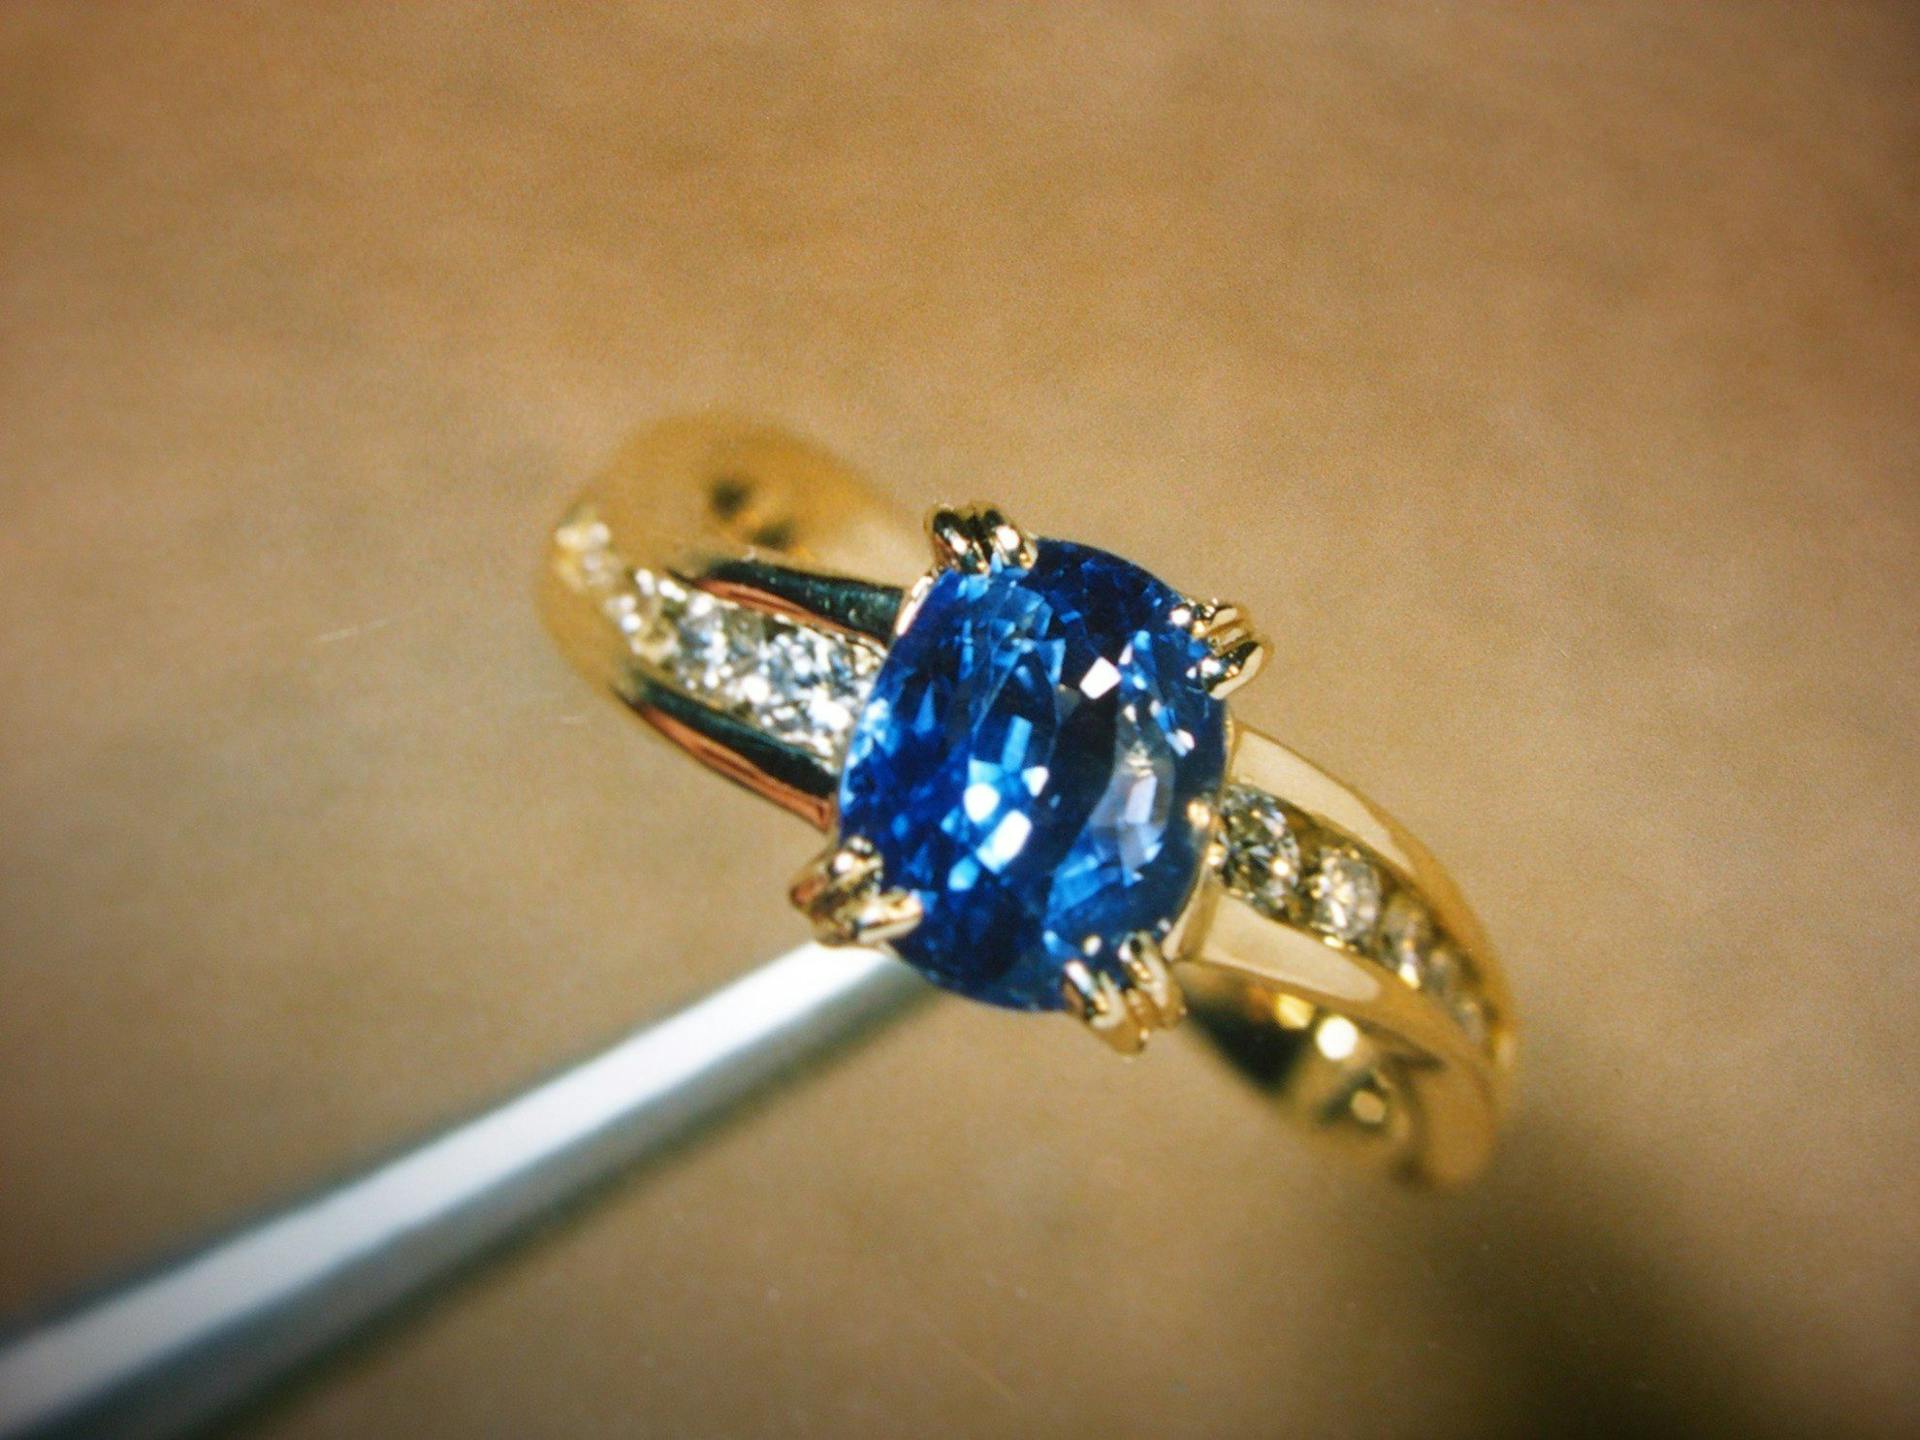 blueberry sapphire - sapphire engagement ring stones